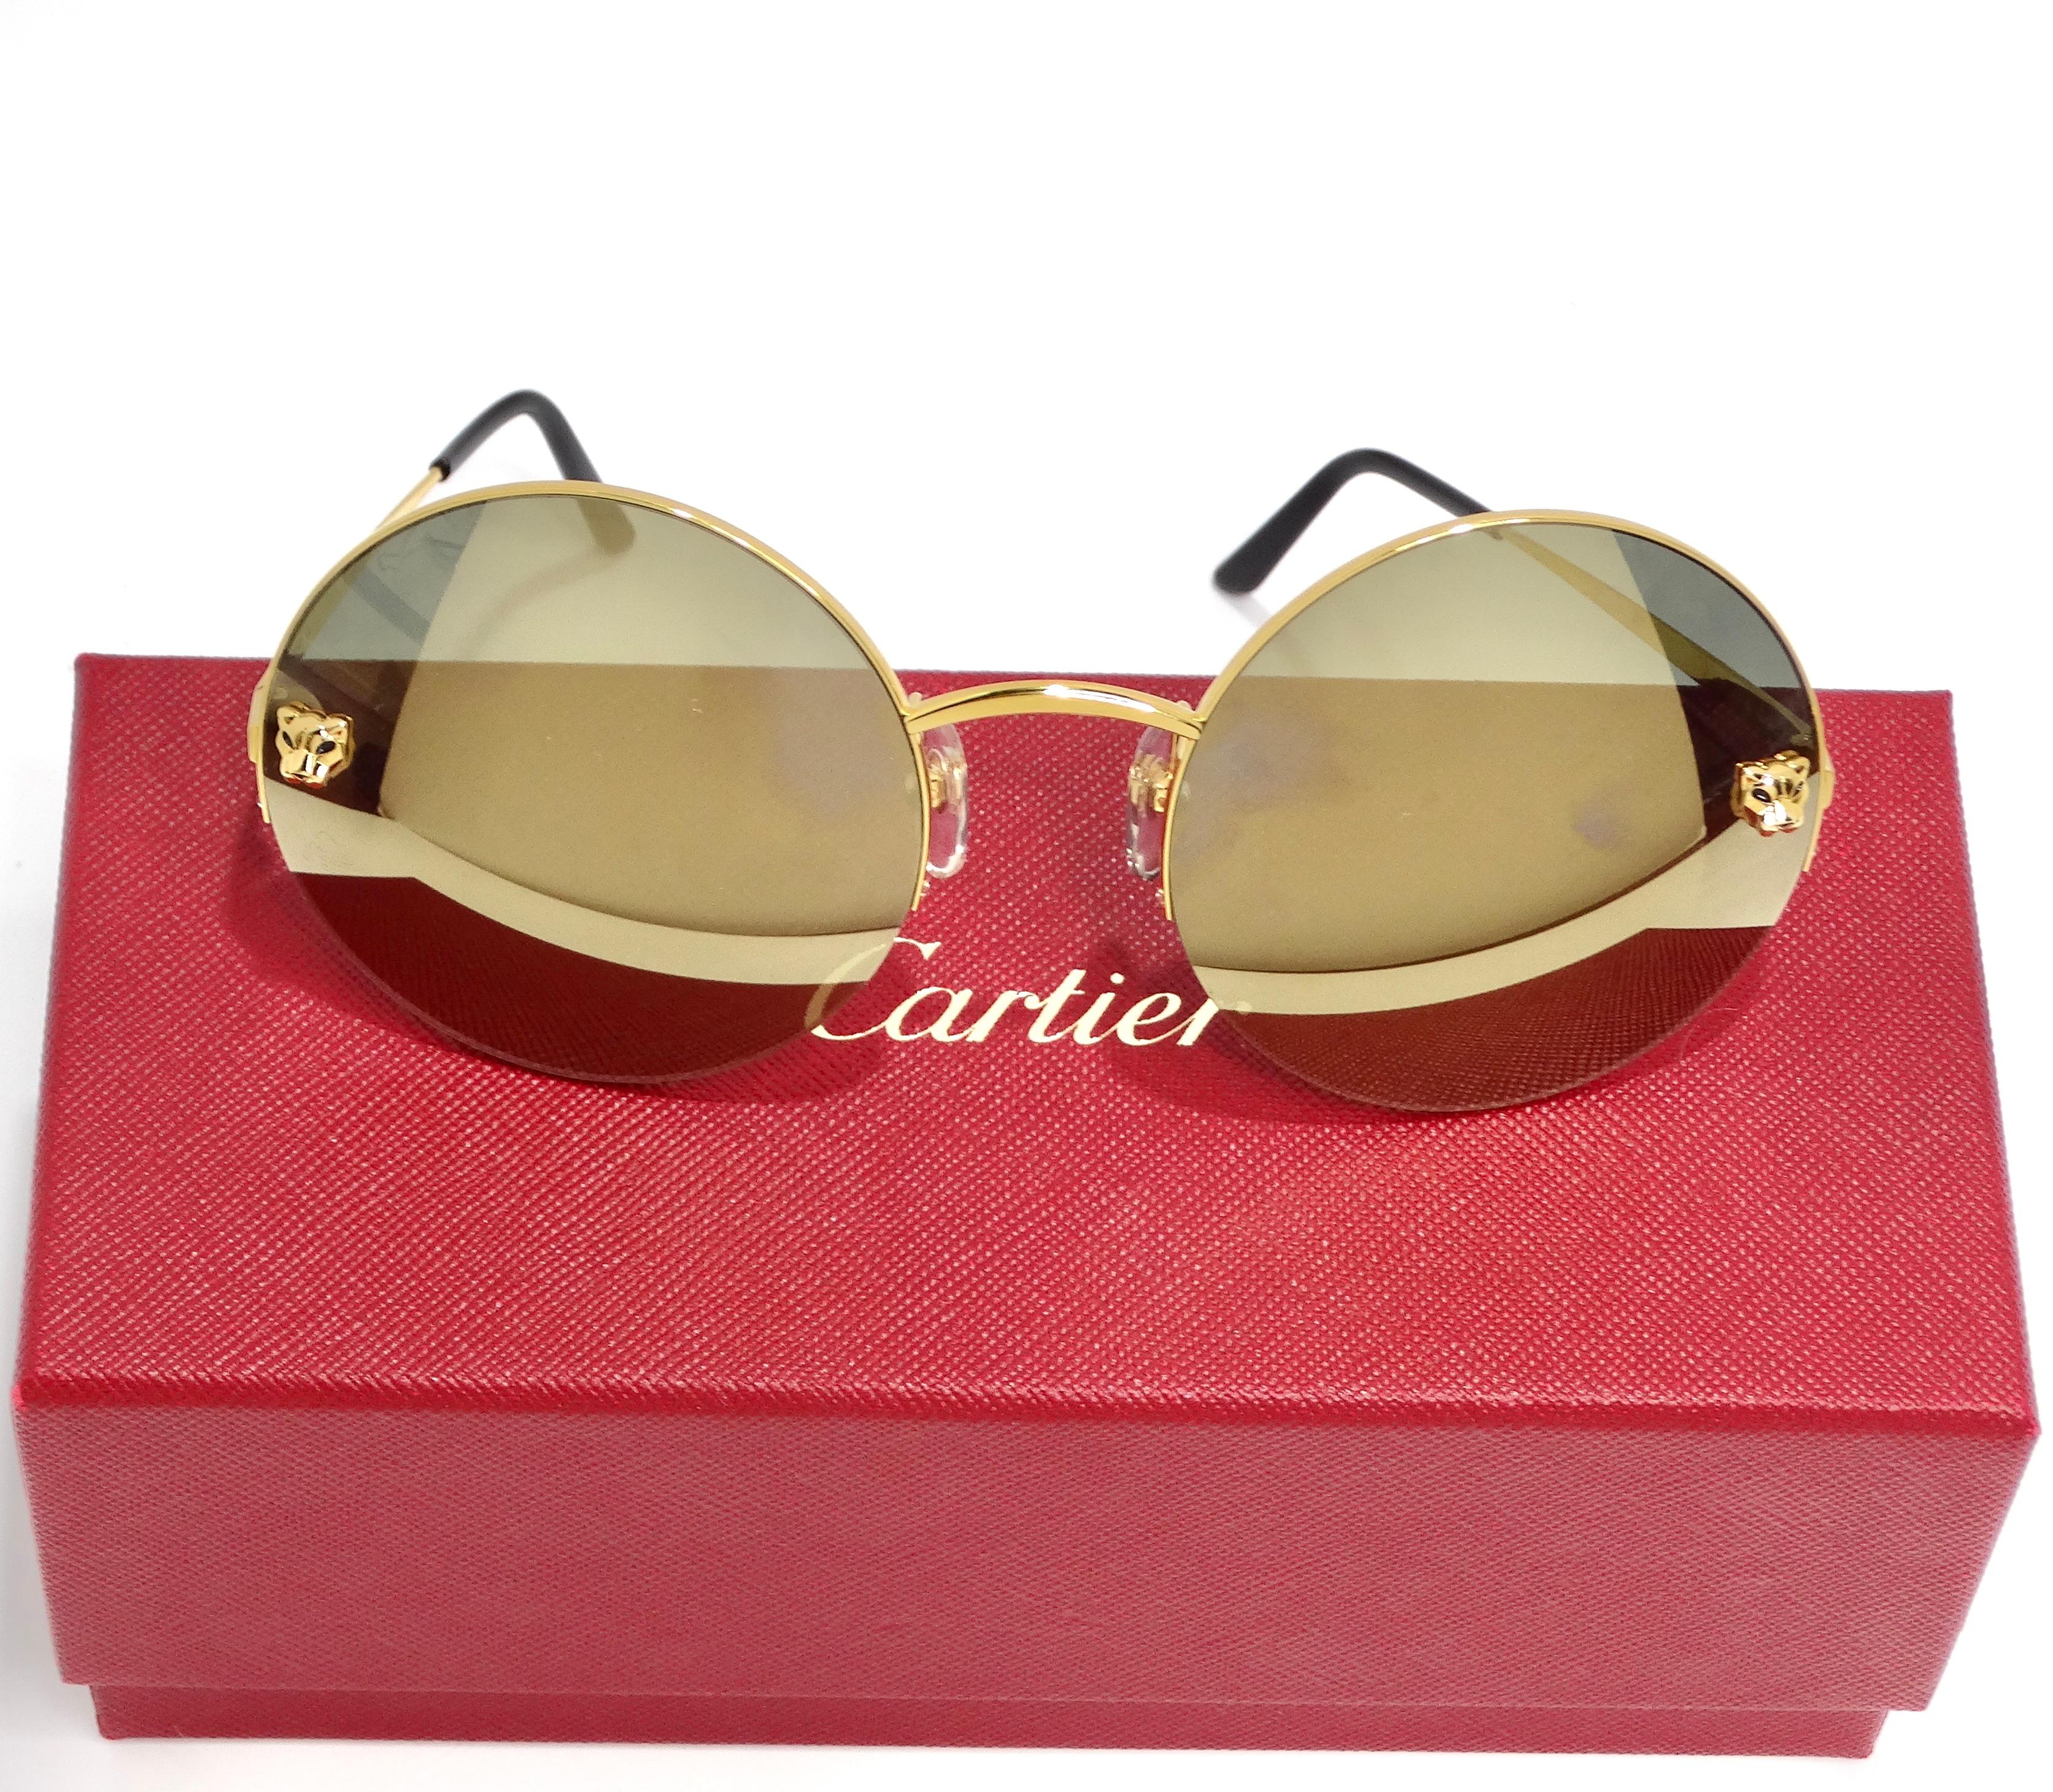 Elevate your eyewear collection with these exquisite Cartier Gold Tone Panthère Round Sunglasses. Crafted with meticulous attention to detail, these sunglasses exude luxury and sophistication.

The stunning round frame design is accentuated by gold